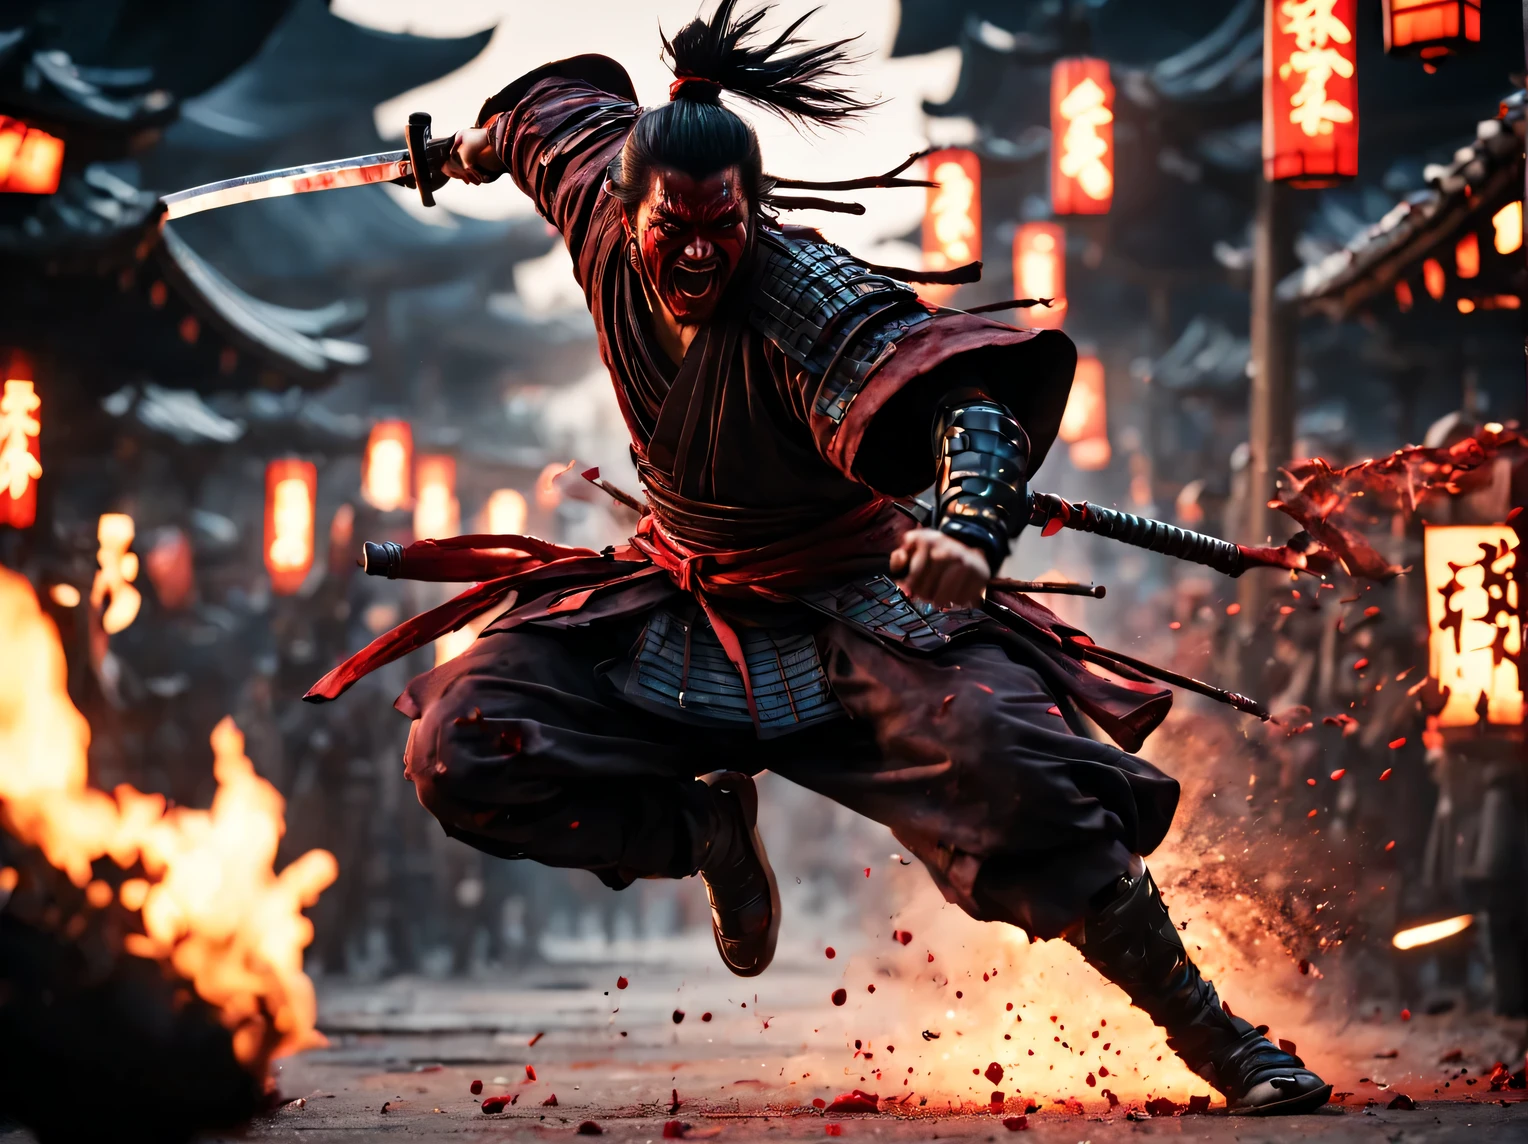 cinematic frame, depicting an action scene, a bloody samurai leaps and swings his sword at the enemy, emotions of rage on his face, grin of rage, metropolis street, Evening, Evening lighting, lantern light, Dynamic frame, cinematic lighting, focus on samurai, High detail, maximum realism, cinematic treatment